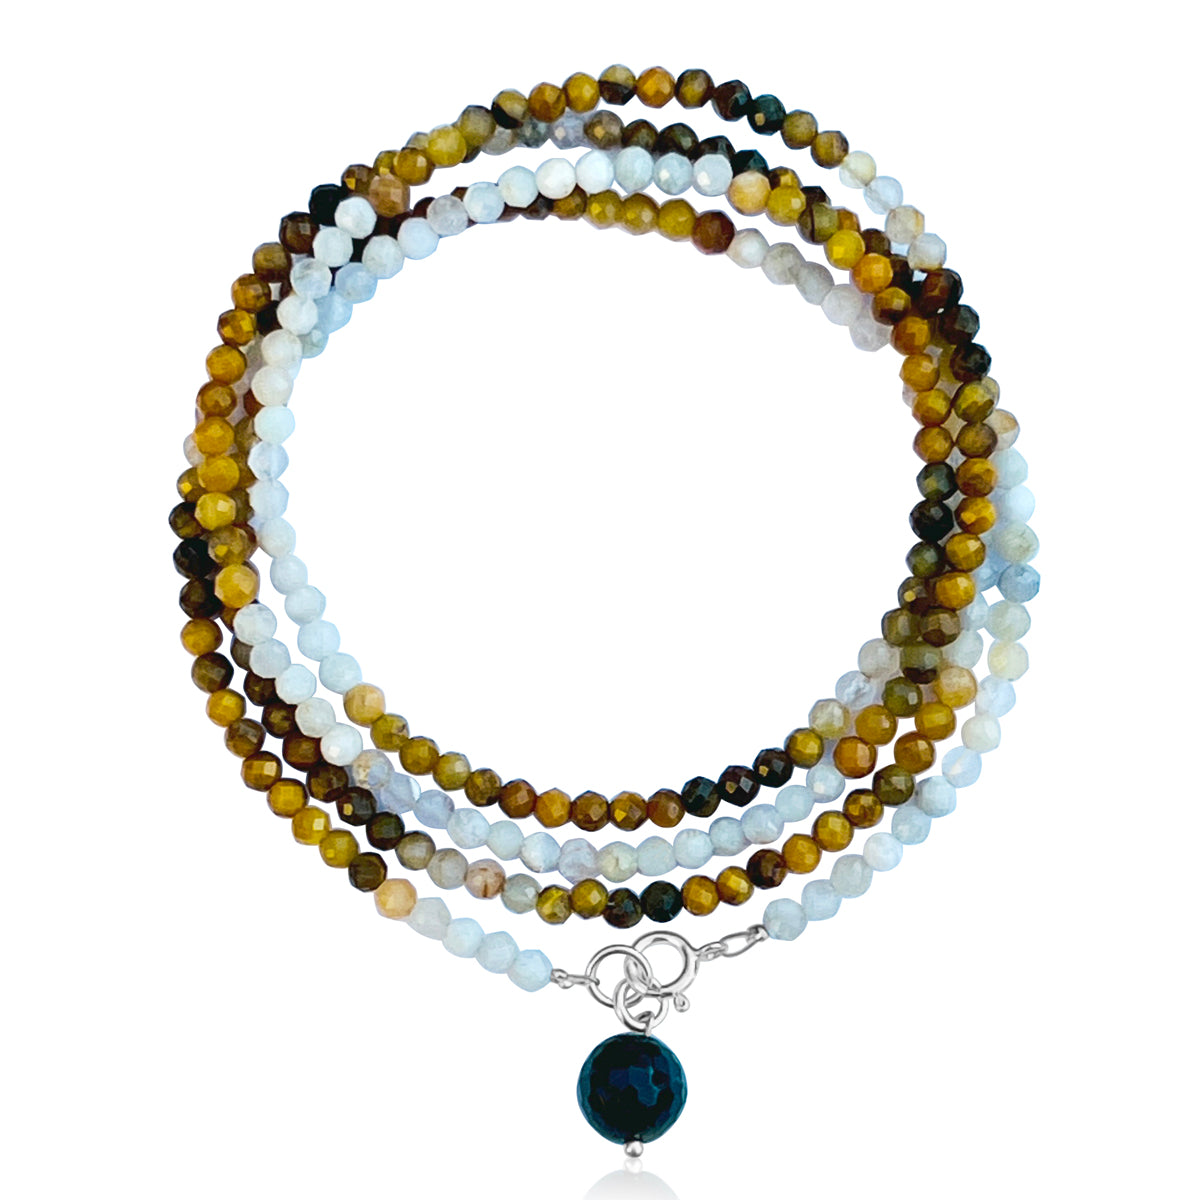 Determination Wrap Bracelet with Tiger Eye and Moonstone, Agate